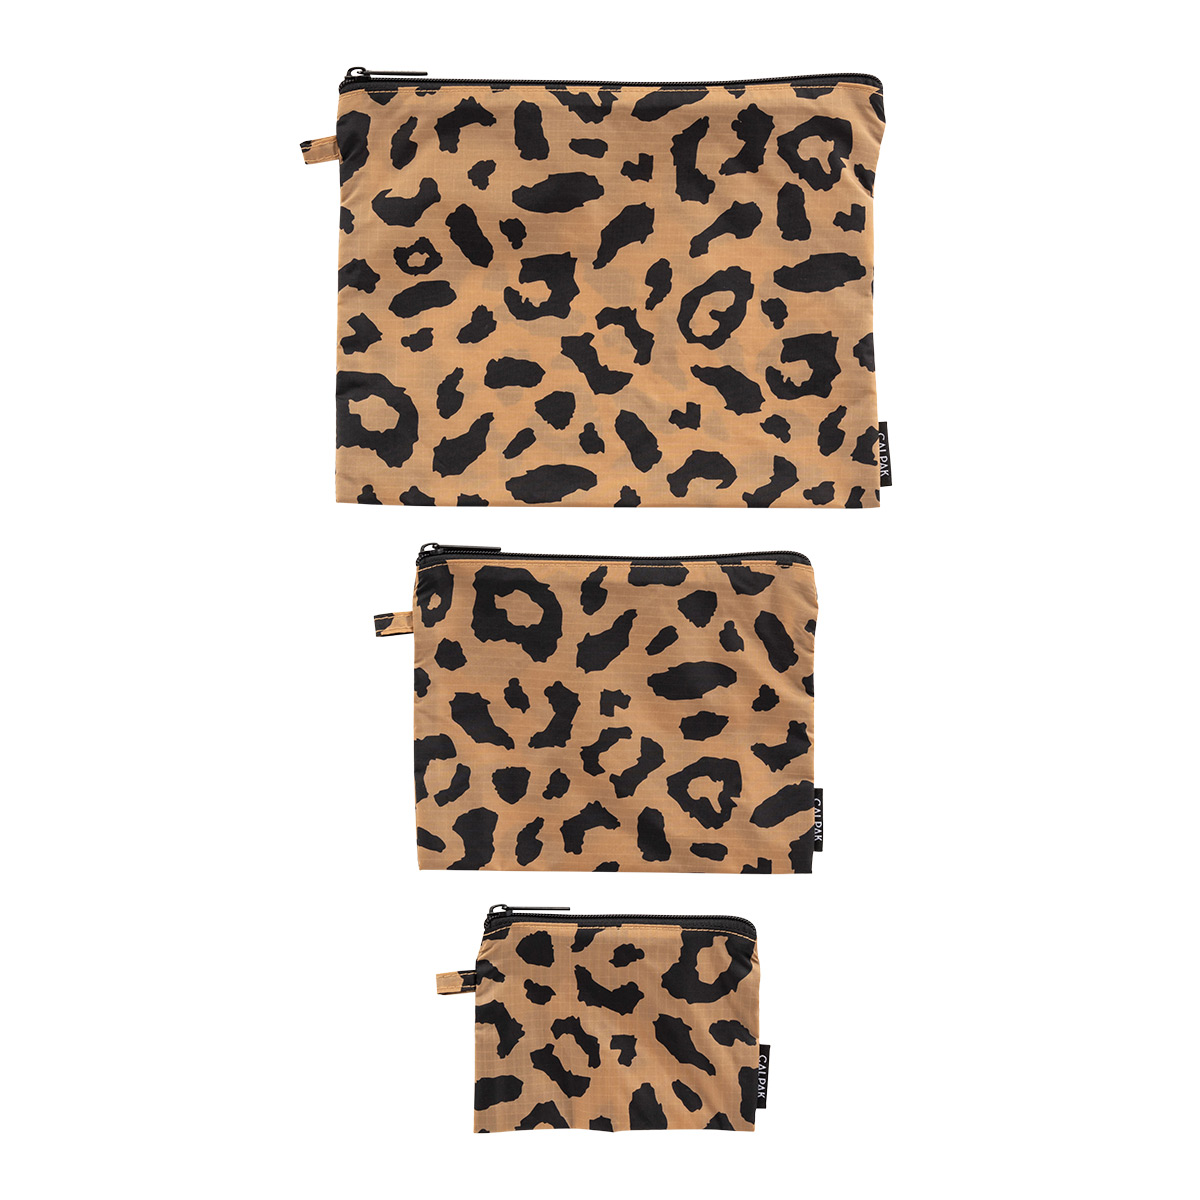 CALPAK Compakt Zippered Pouch Set of 3 | The Container Store